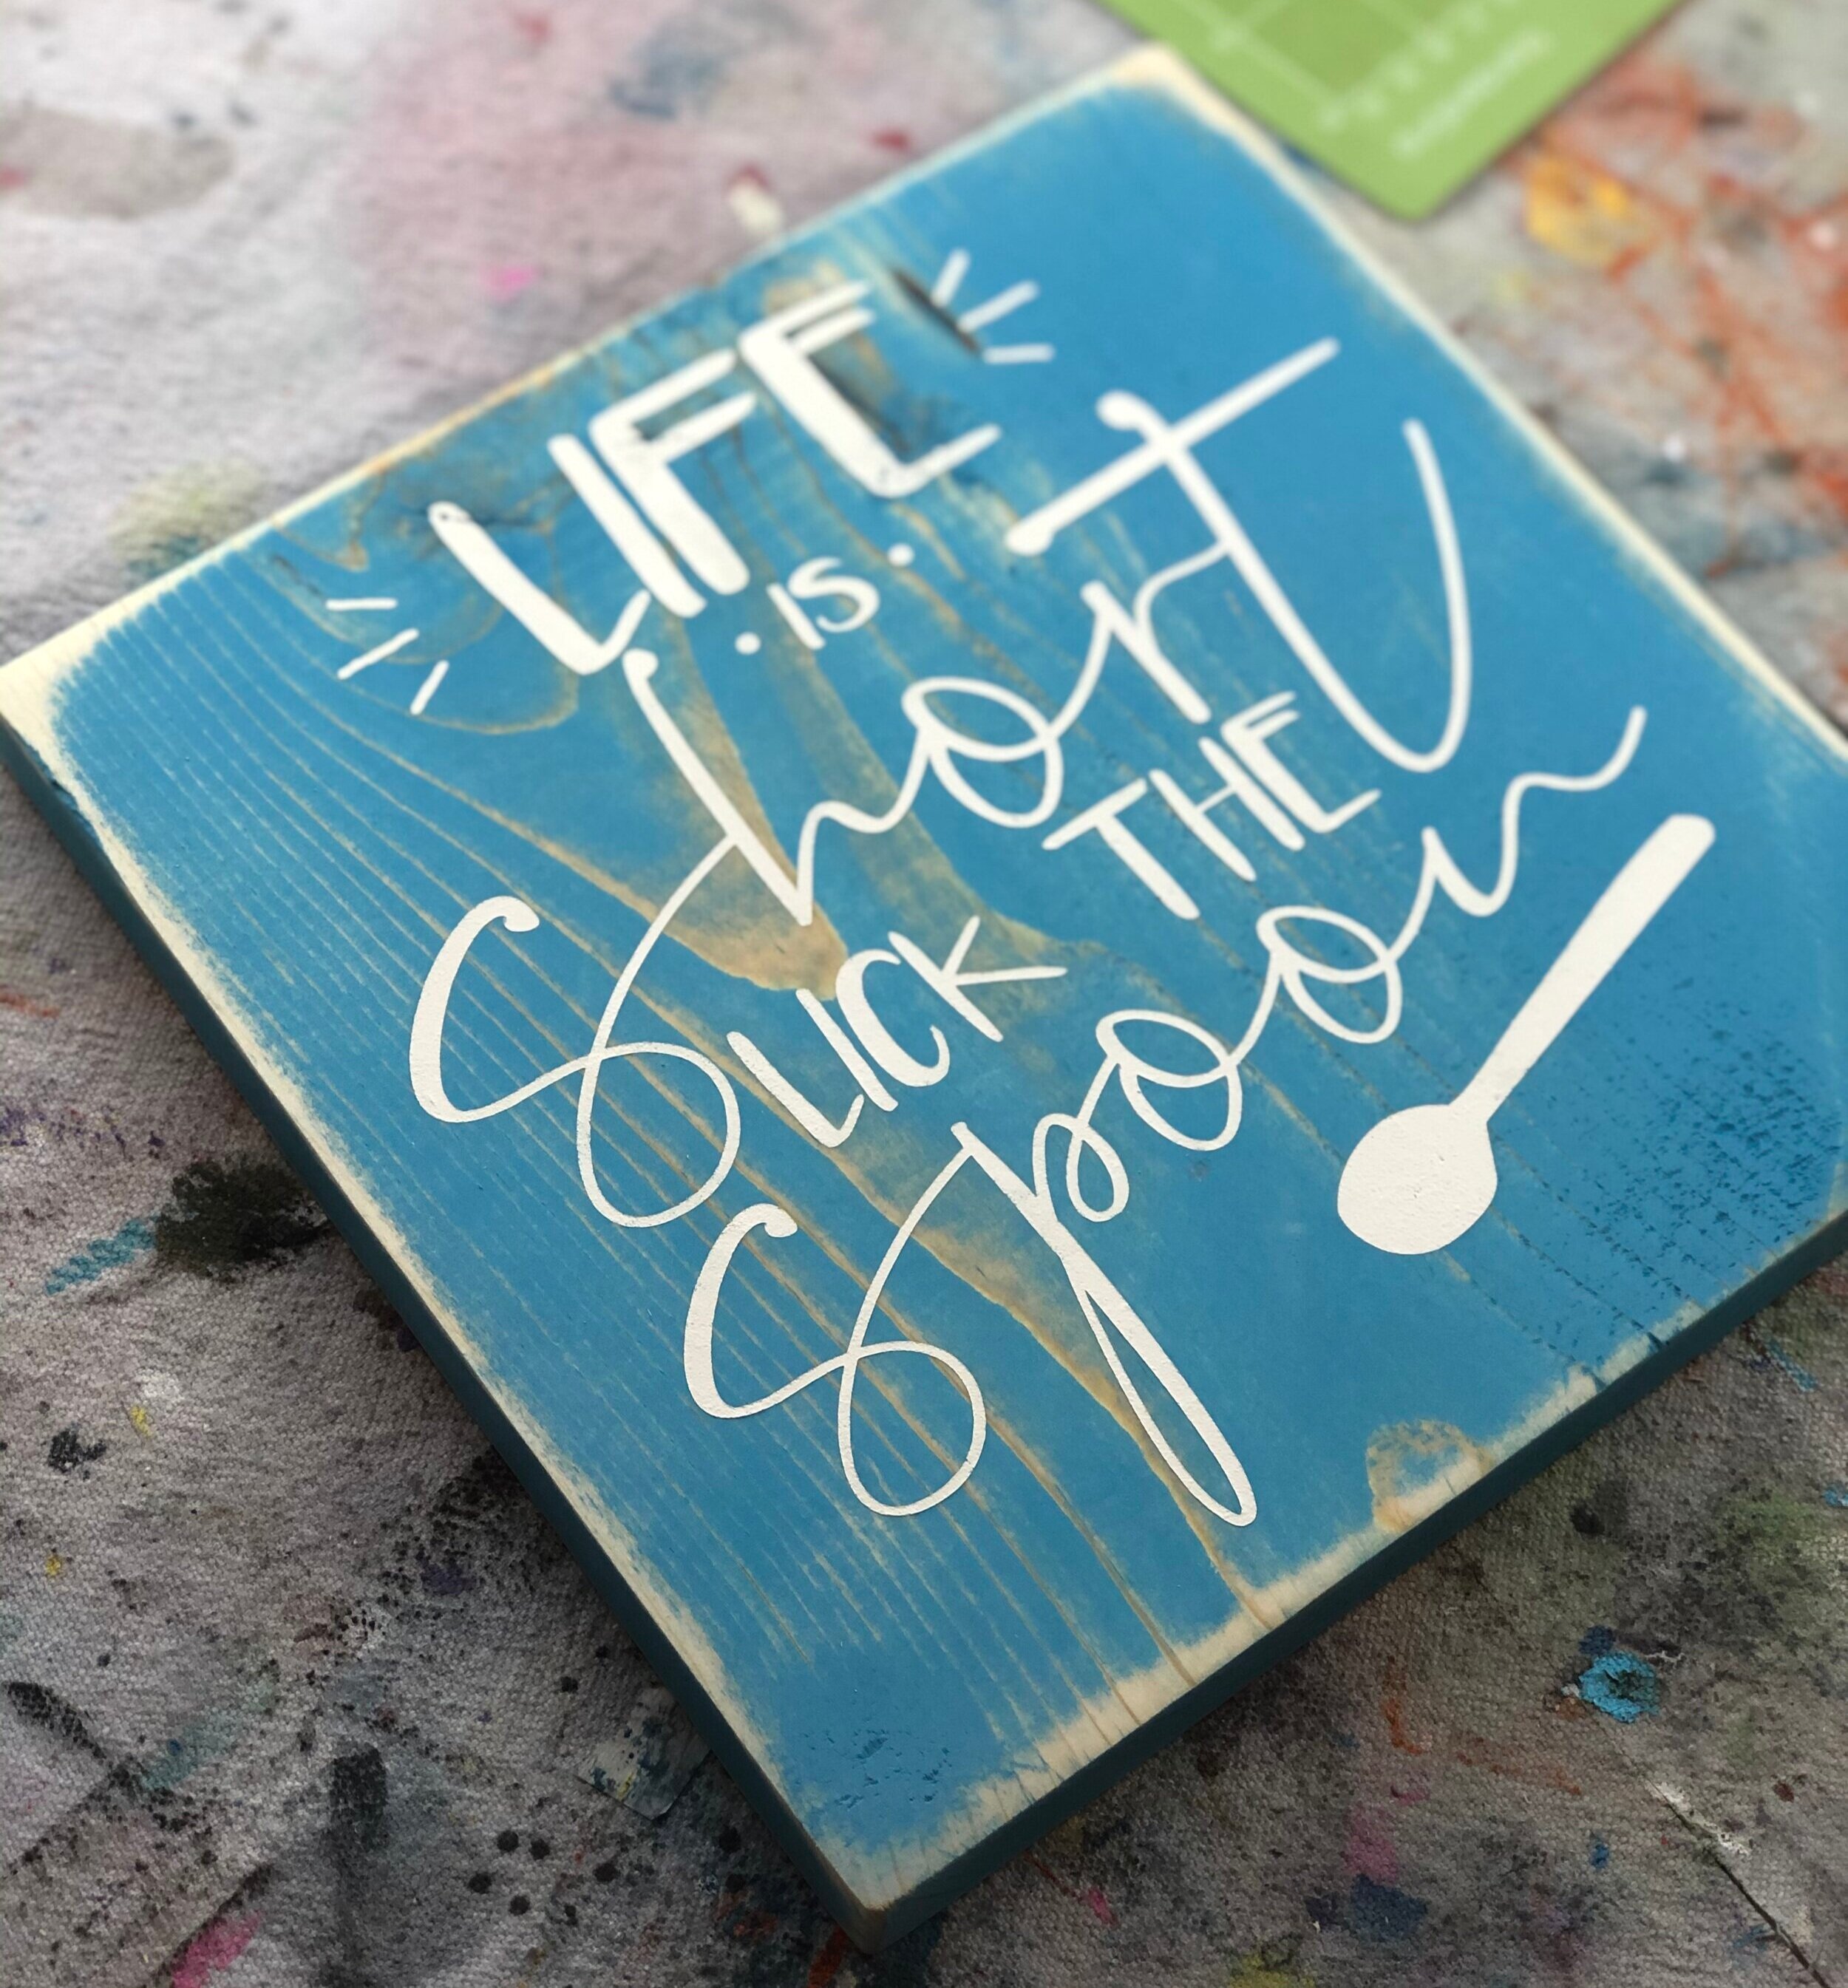 Life is short lick the spoon wood sign. How to paint a wooden kitchen sign with a humorous saying. Stained aqua sign with a white stenciled saying